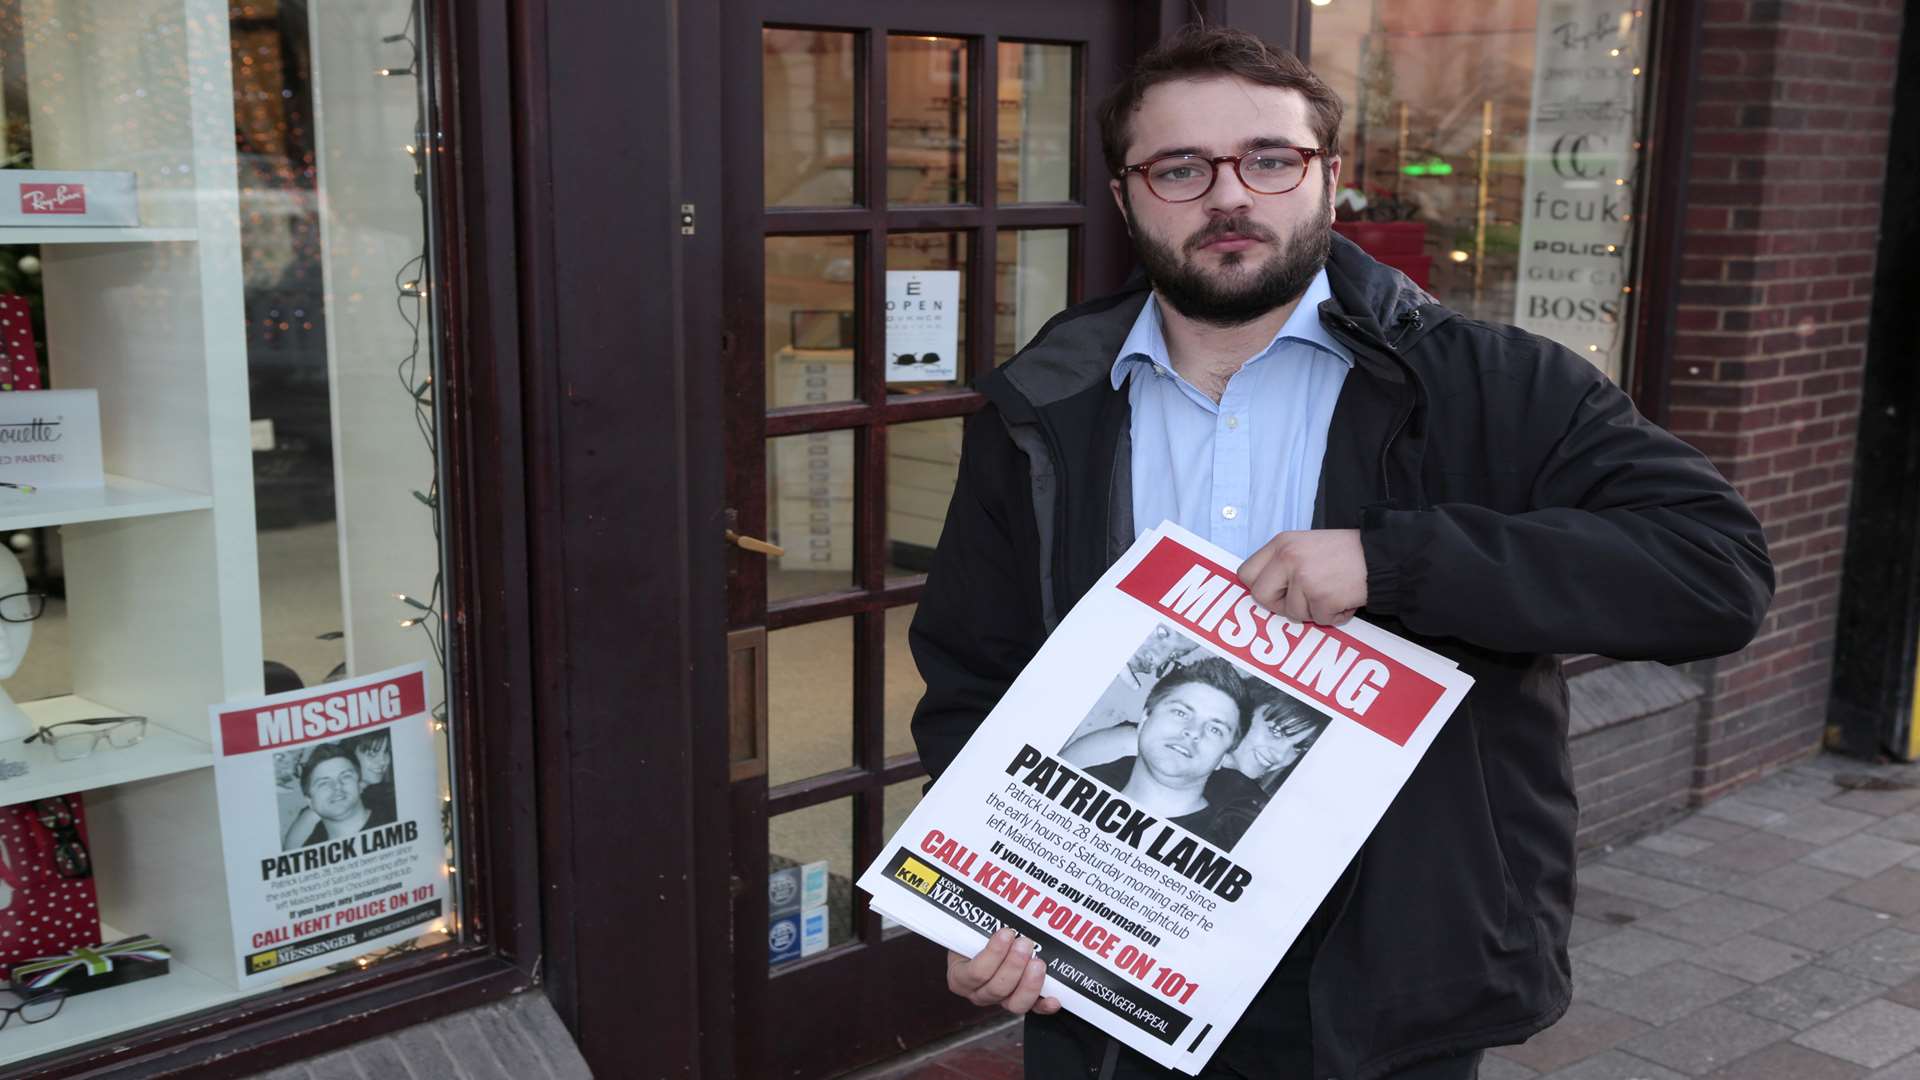 KM reporter Ed McConnell hands out posters to local businesses as part of the search to find Pat Lamb